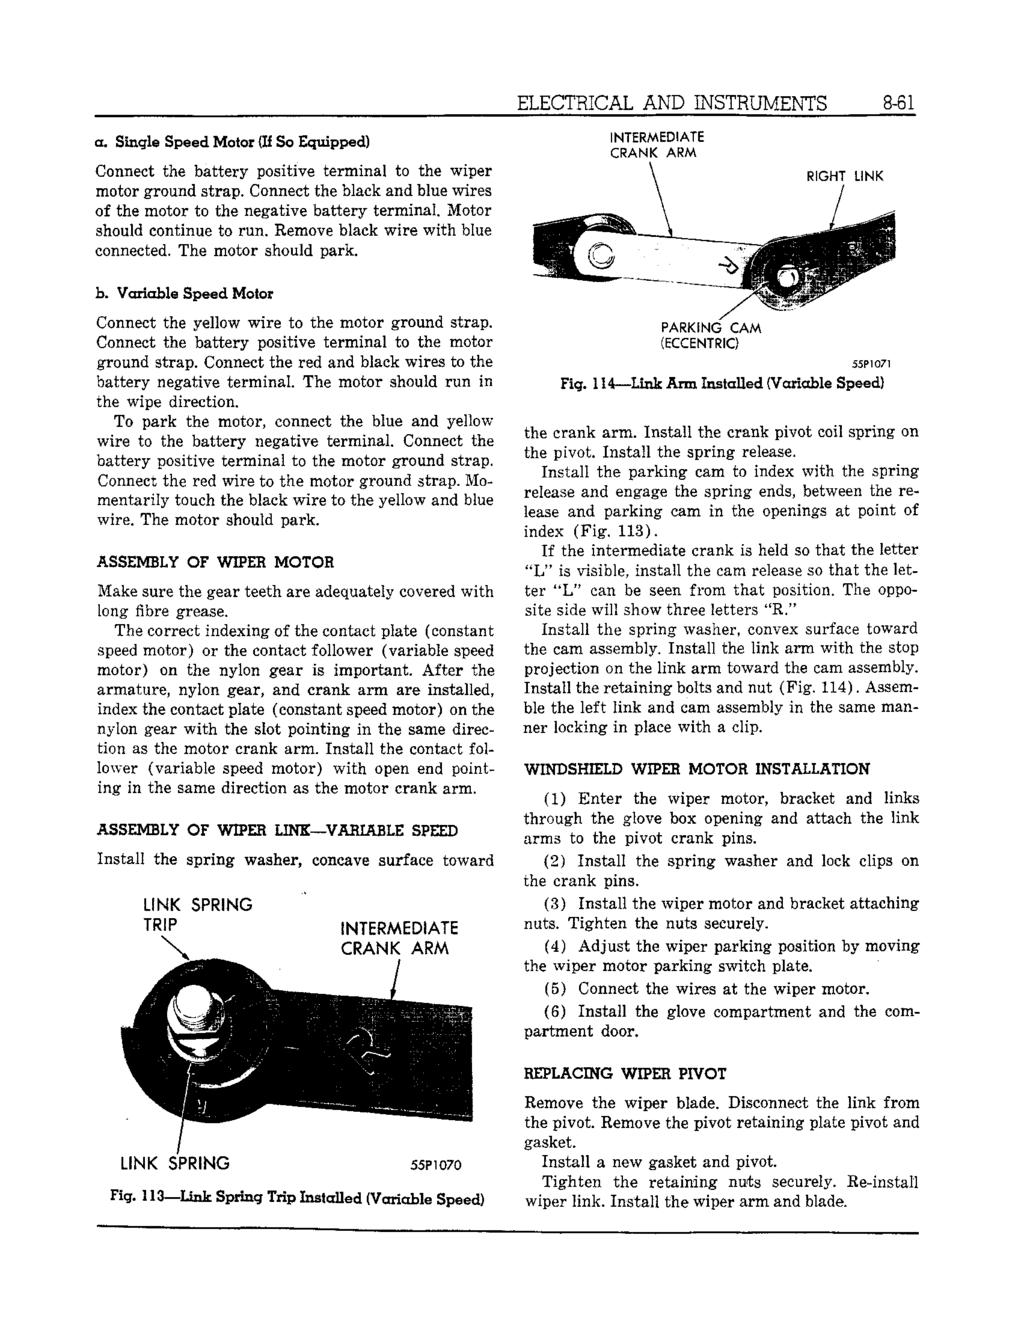 ELECTRICAL AND INSTRUMENTS 8-61 a. Single Speed Motor (If So Equipped) Connect the battery positive terminal to the wiper motor ground strap.